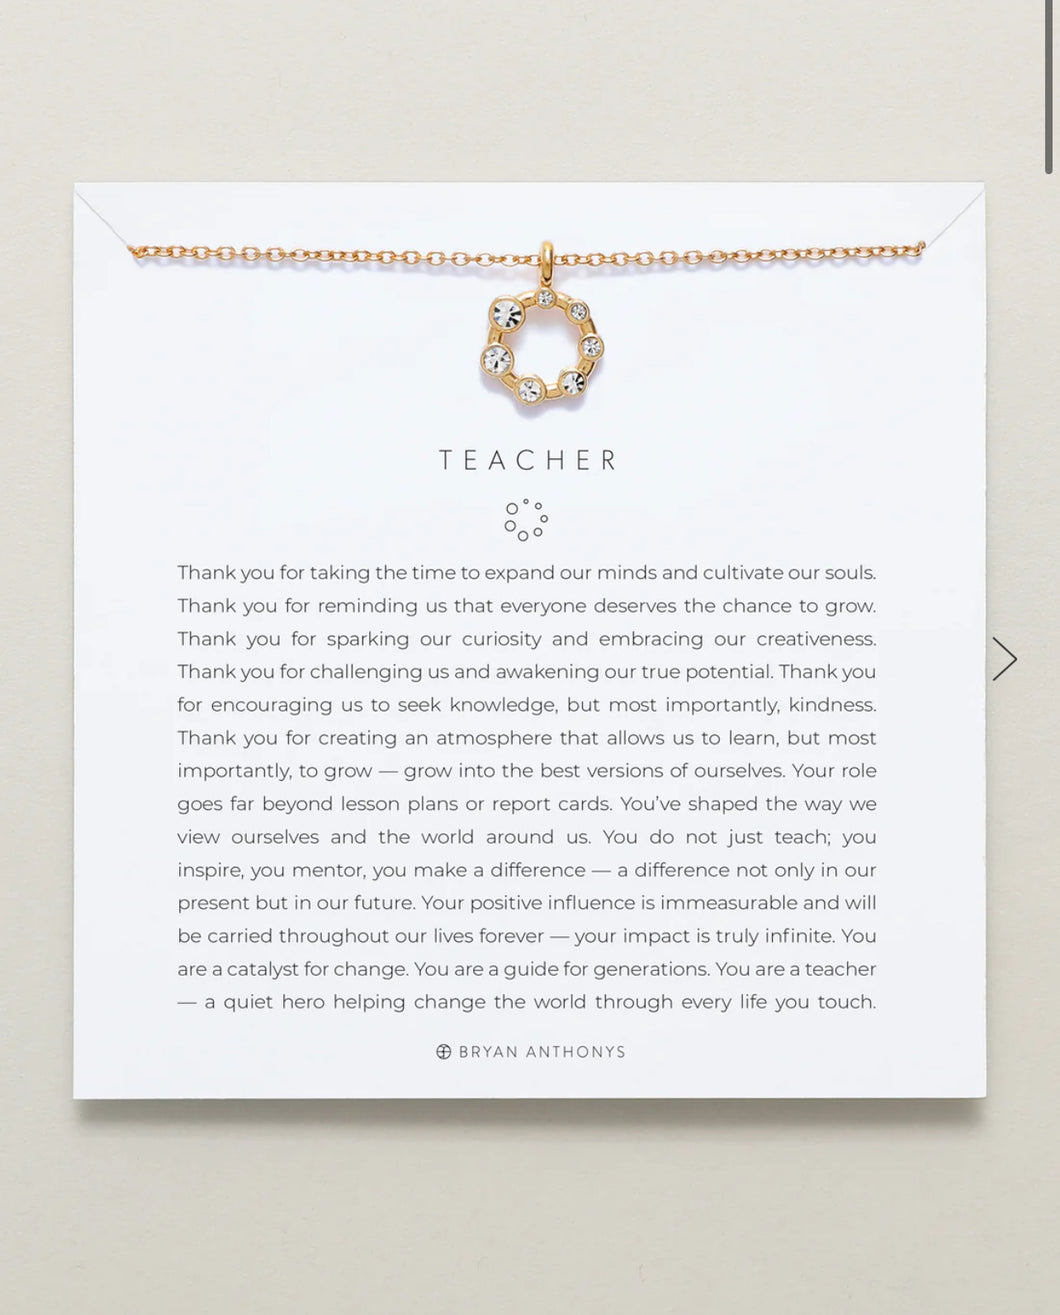 Bryan Anthonys: Teacher Necklace in Gold